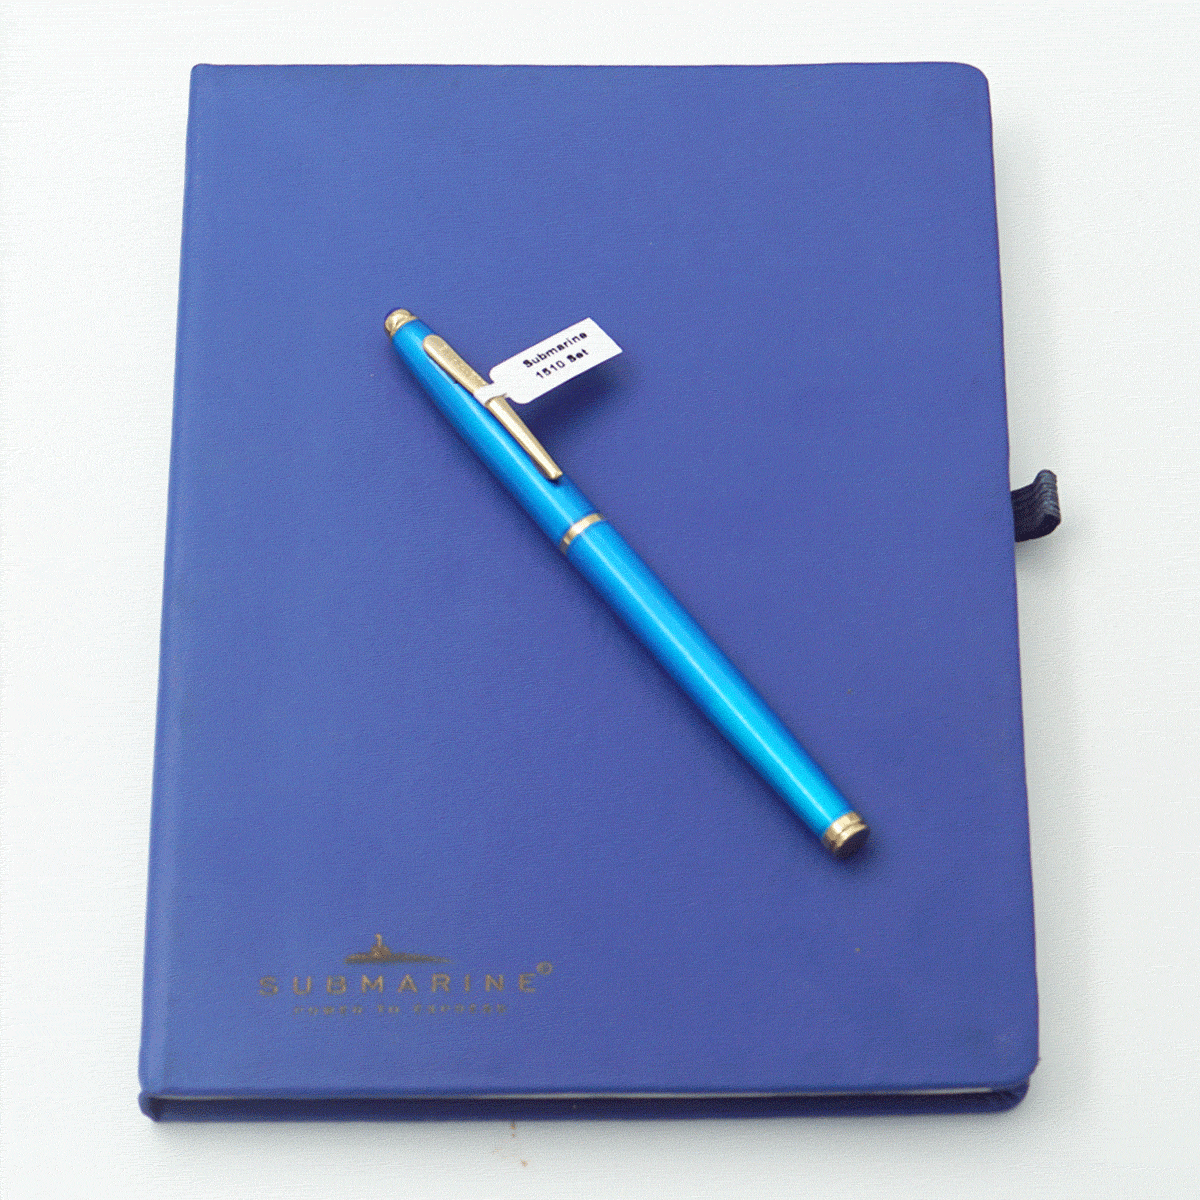 Submarine 1510 Blue Color Body With Blue Cap And Gold Clip Medium Tip Roller Ball Pen With Diary Pen Set SKU 23923